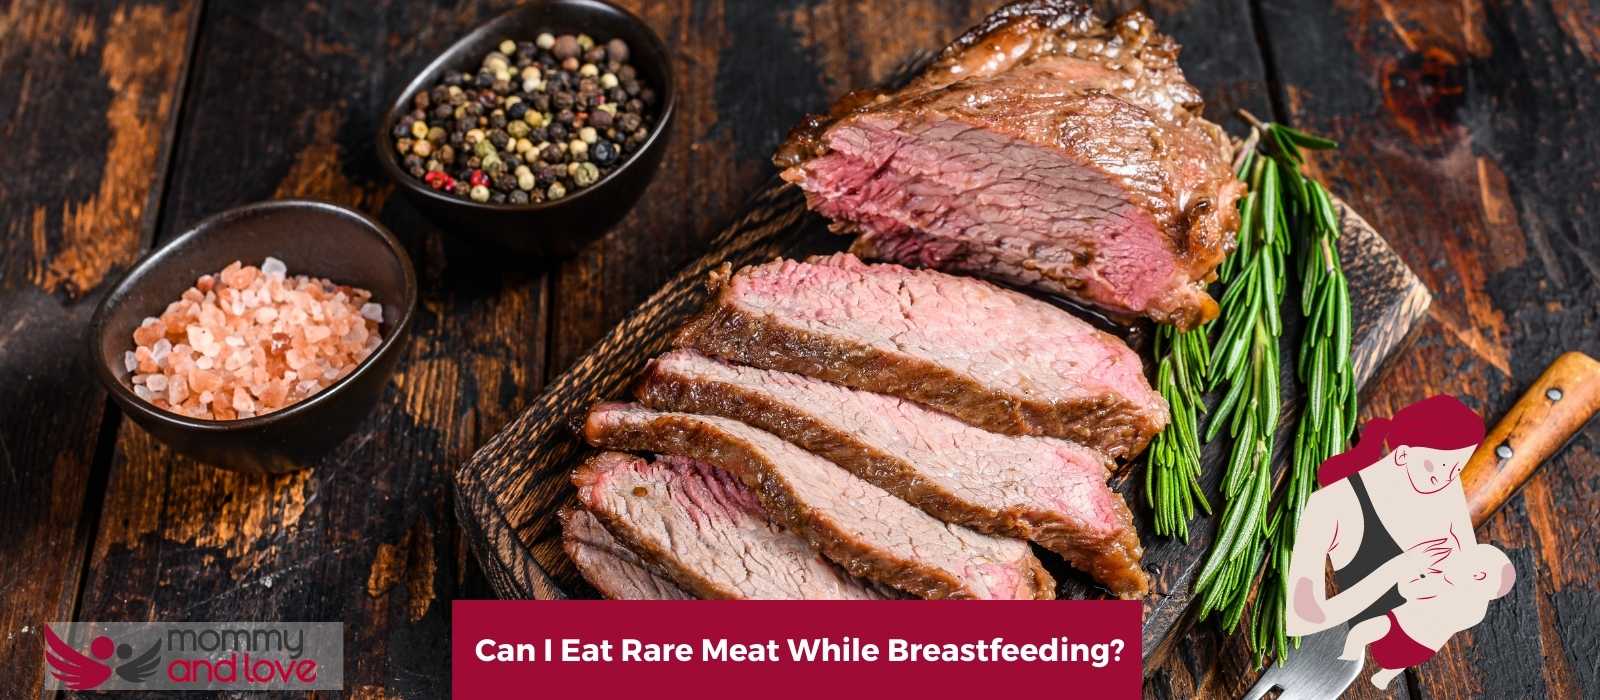 Can I Eat Rare Meat While Breastfeeding